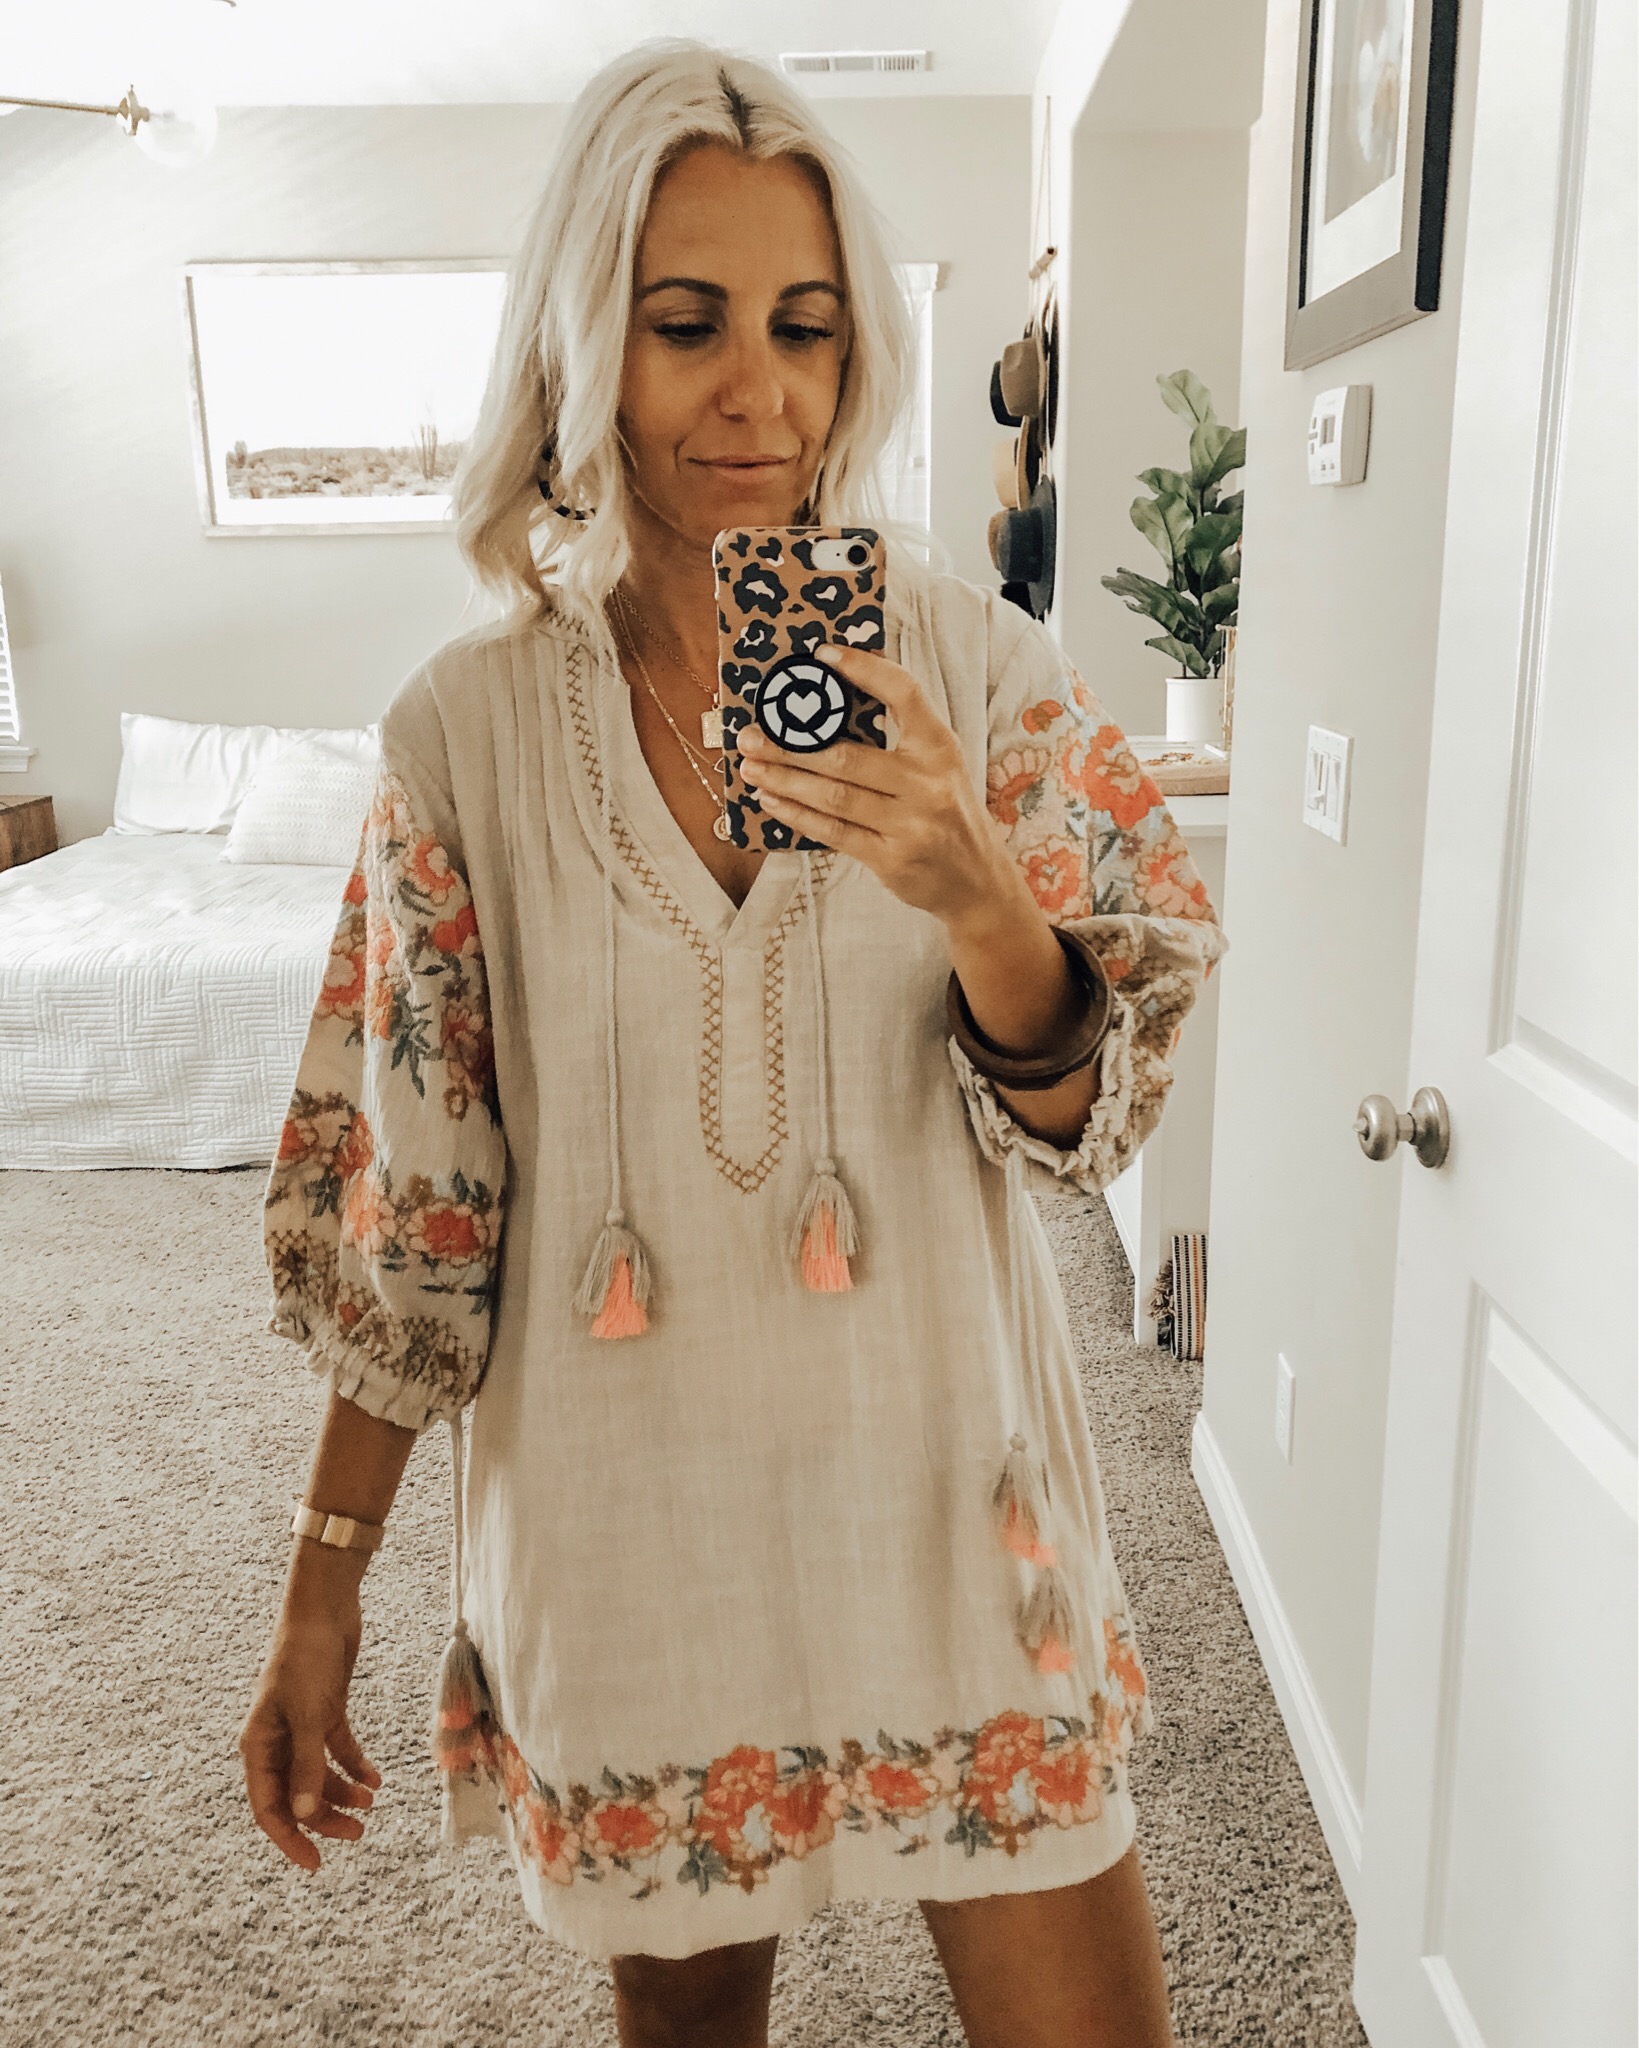 JUNE TOP 10- Jaclyn De Leon Style- No surprise that 8 out of the top 10 sellers were Amazon Finds. Favorites from boho dresses, to jewelry organizer, espadrilles and the glow and get it stick.